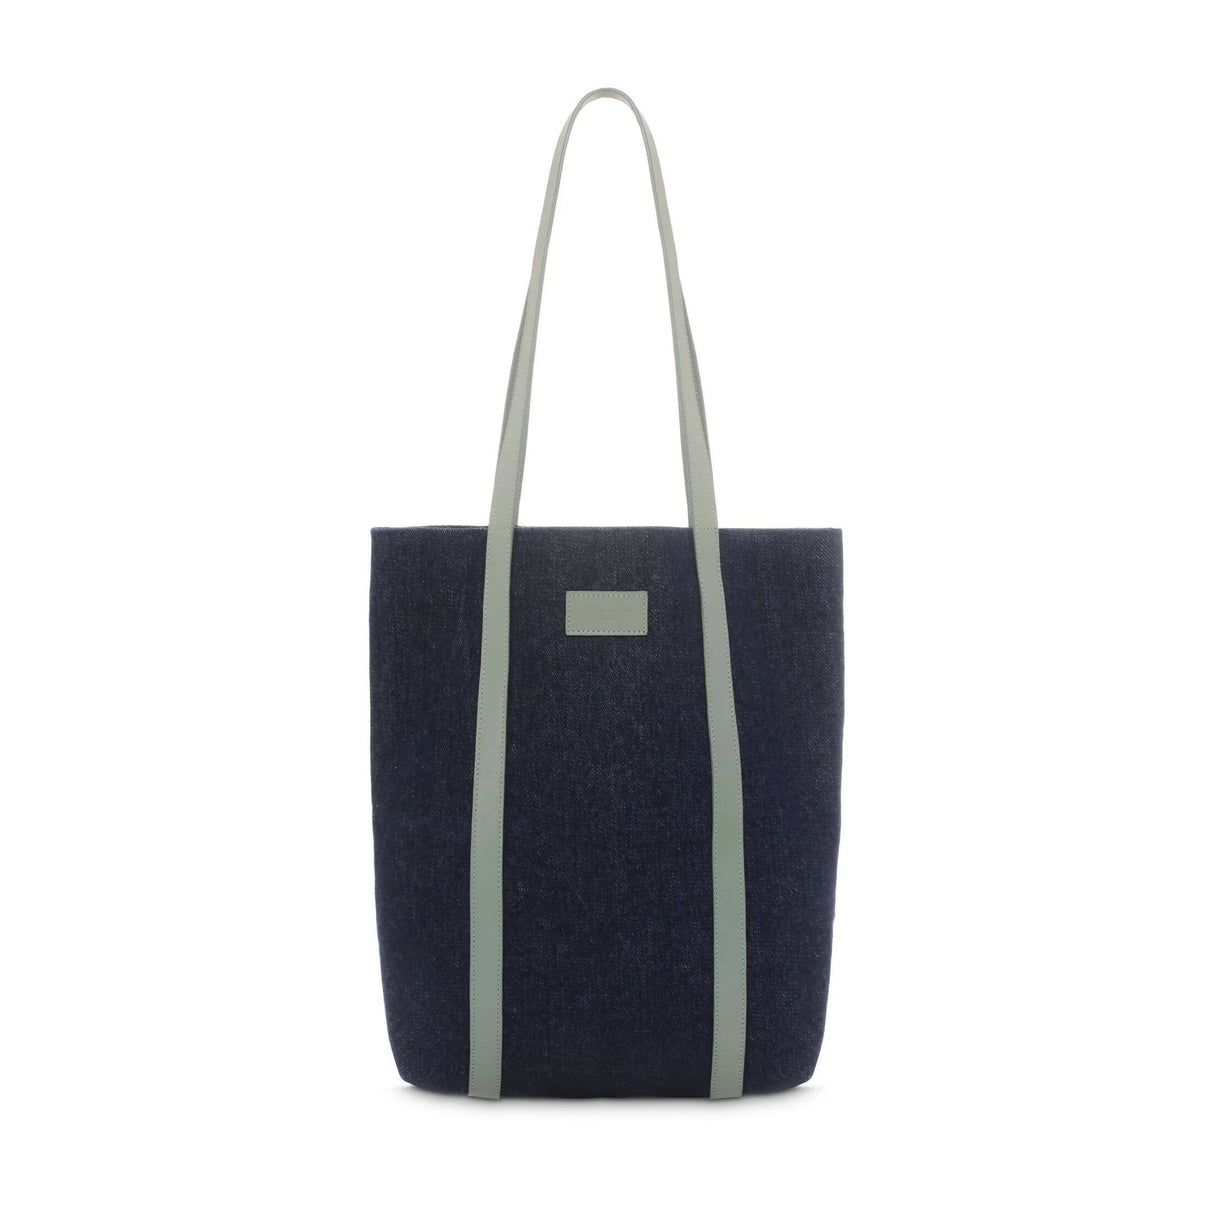 The Tote - Tote bag made from recycled denim with khaki leather finish qu we